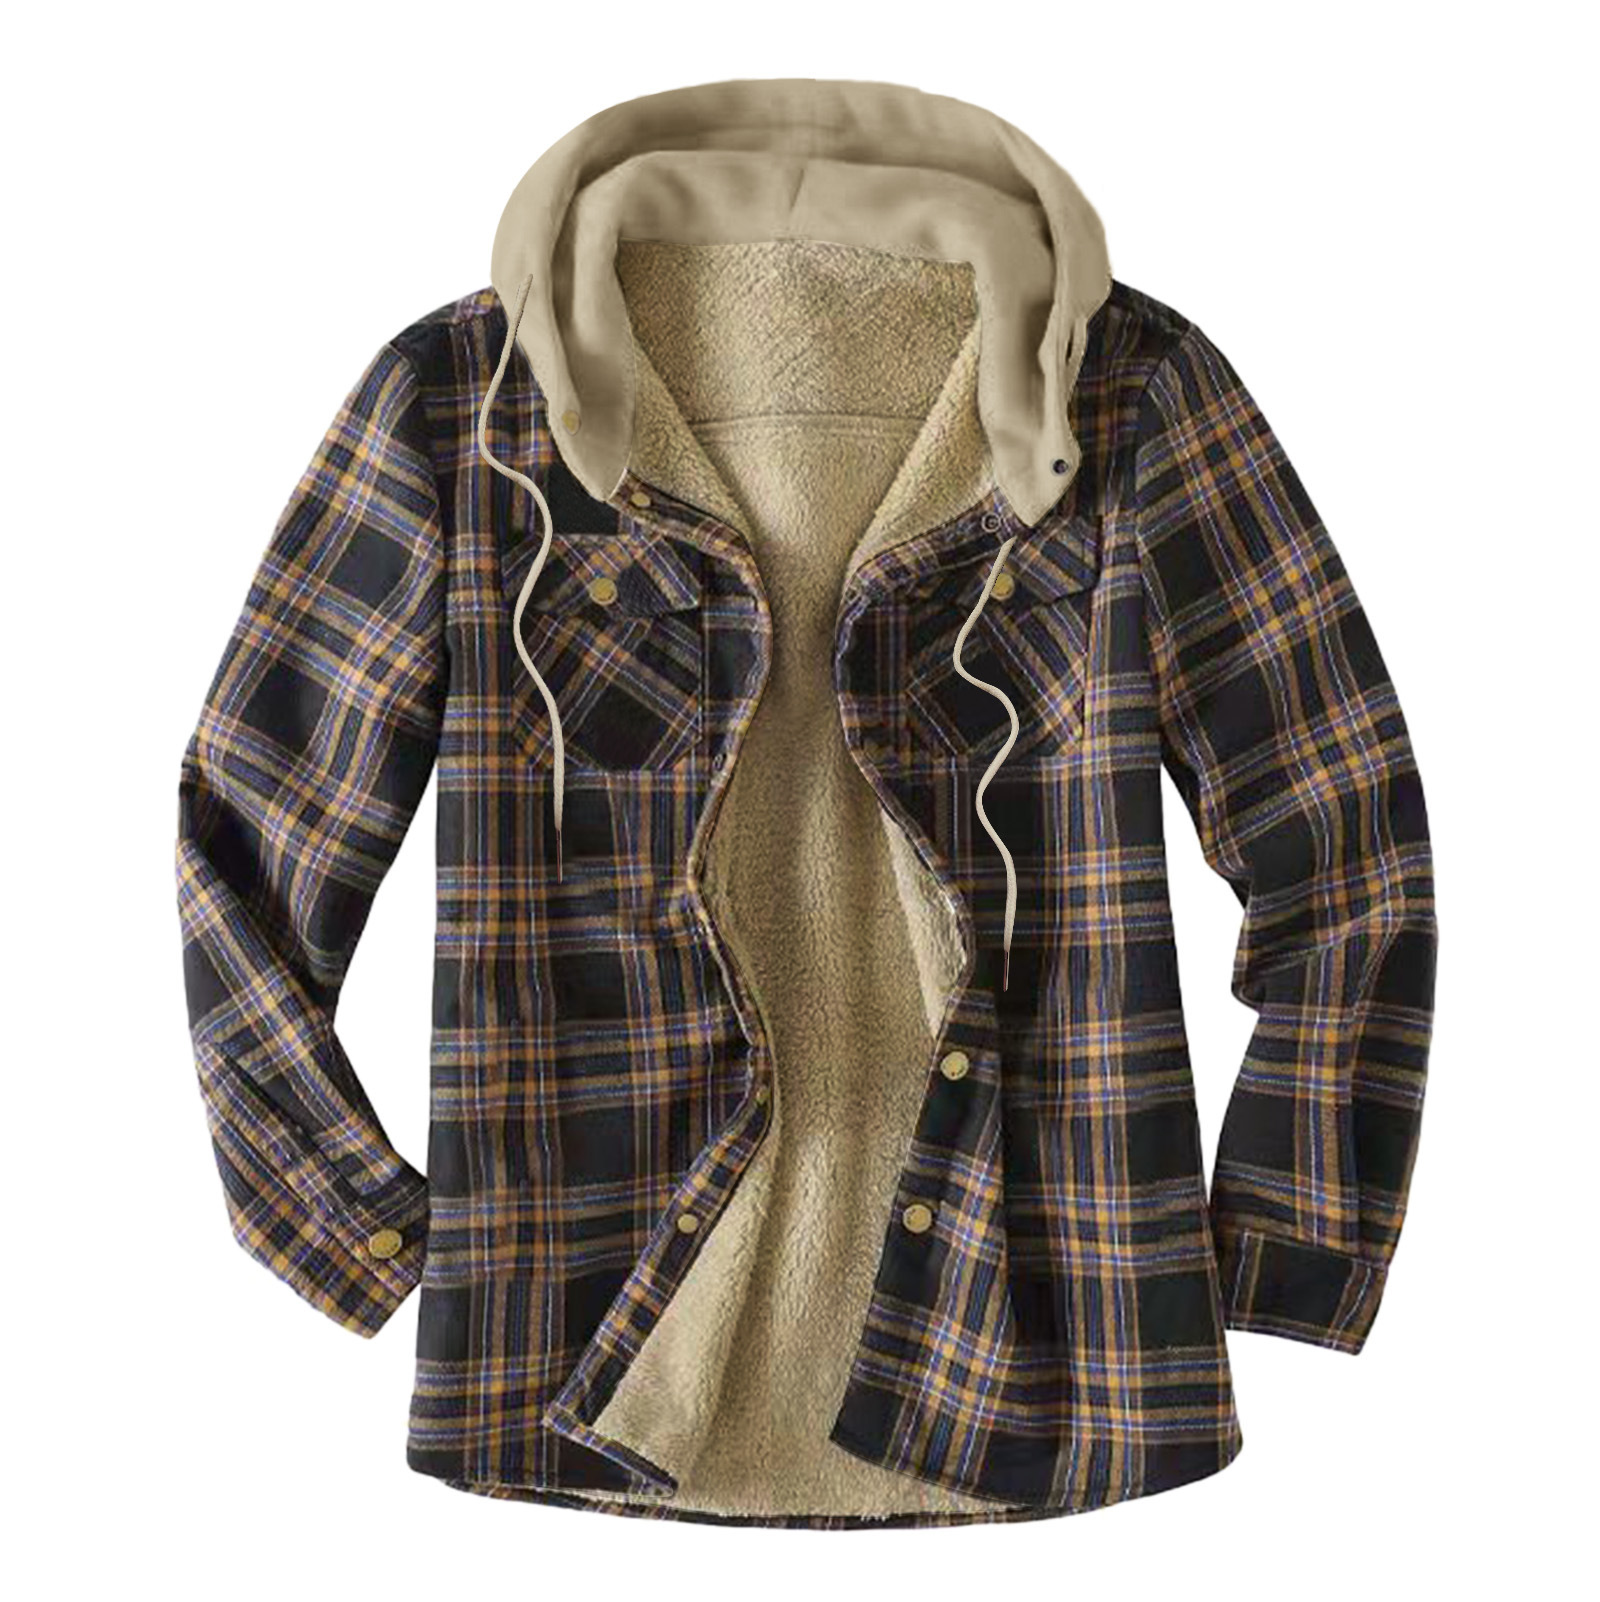 Men's Autumn And Winter Outdoor Plaid Hooded Jacket